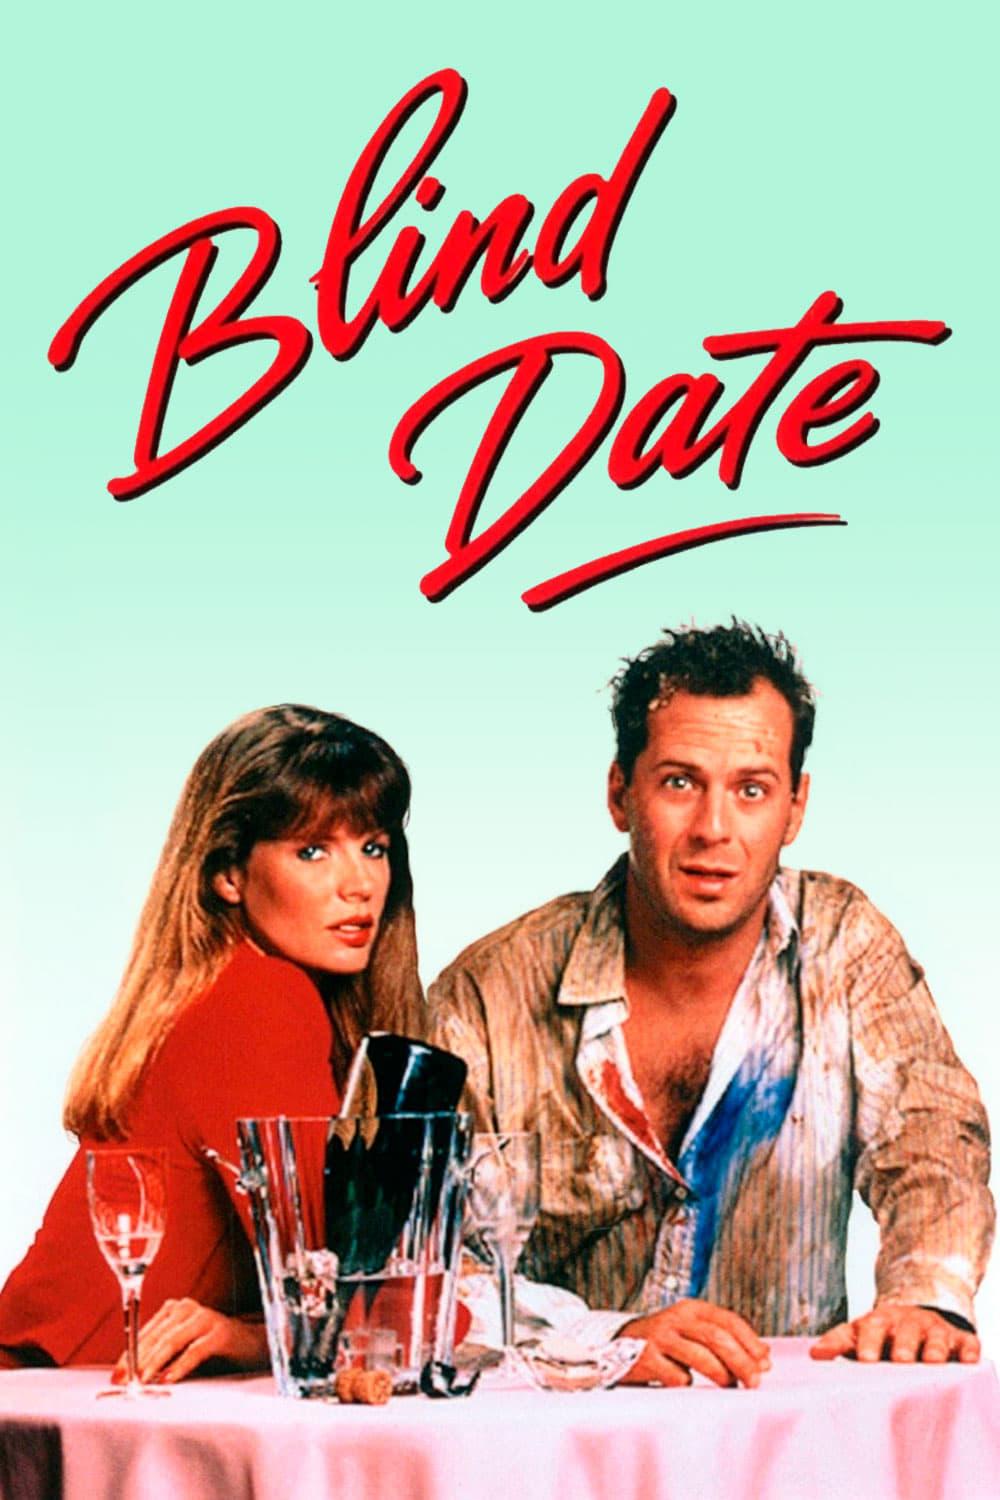 Blind Date poster